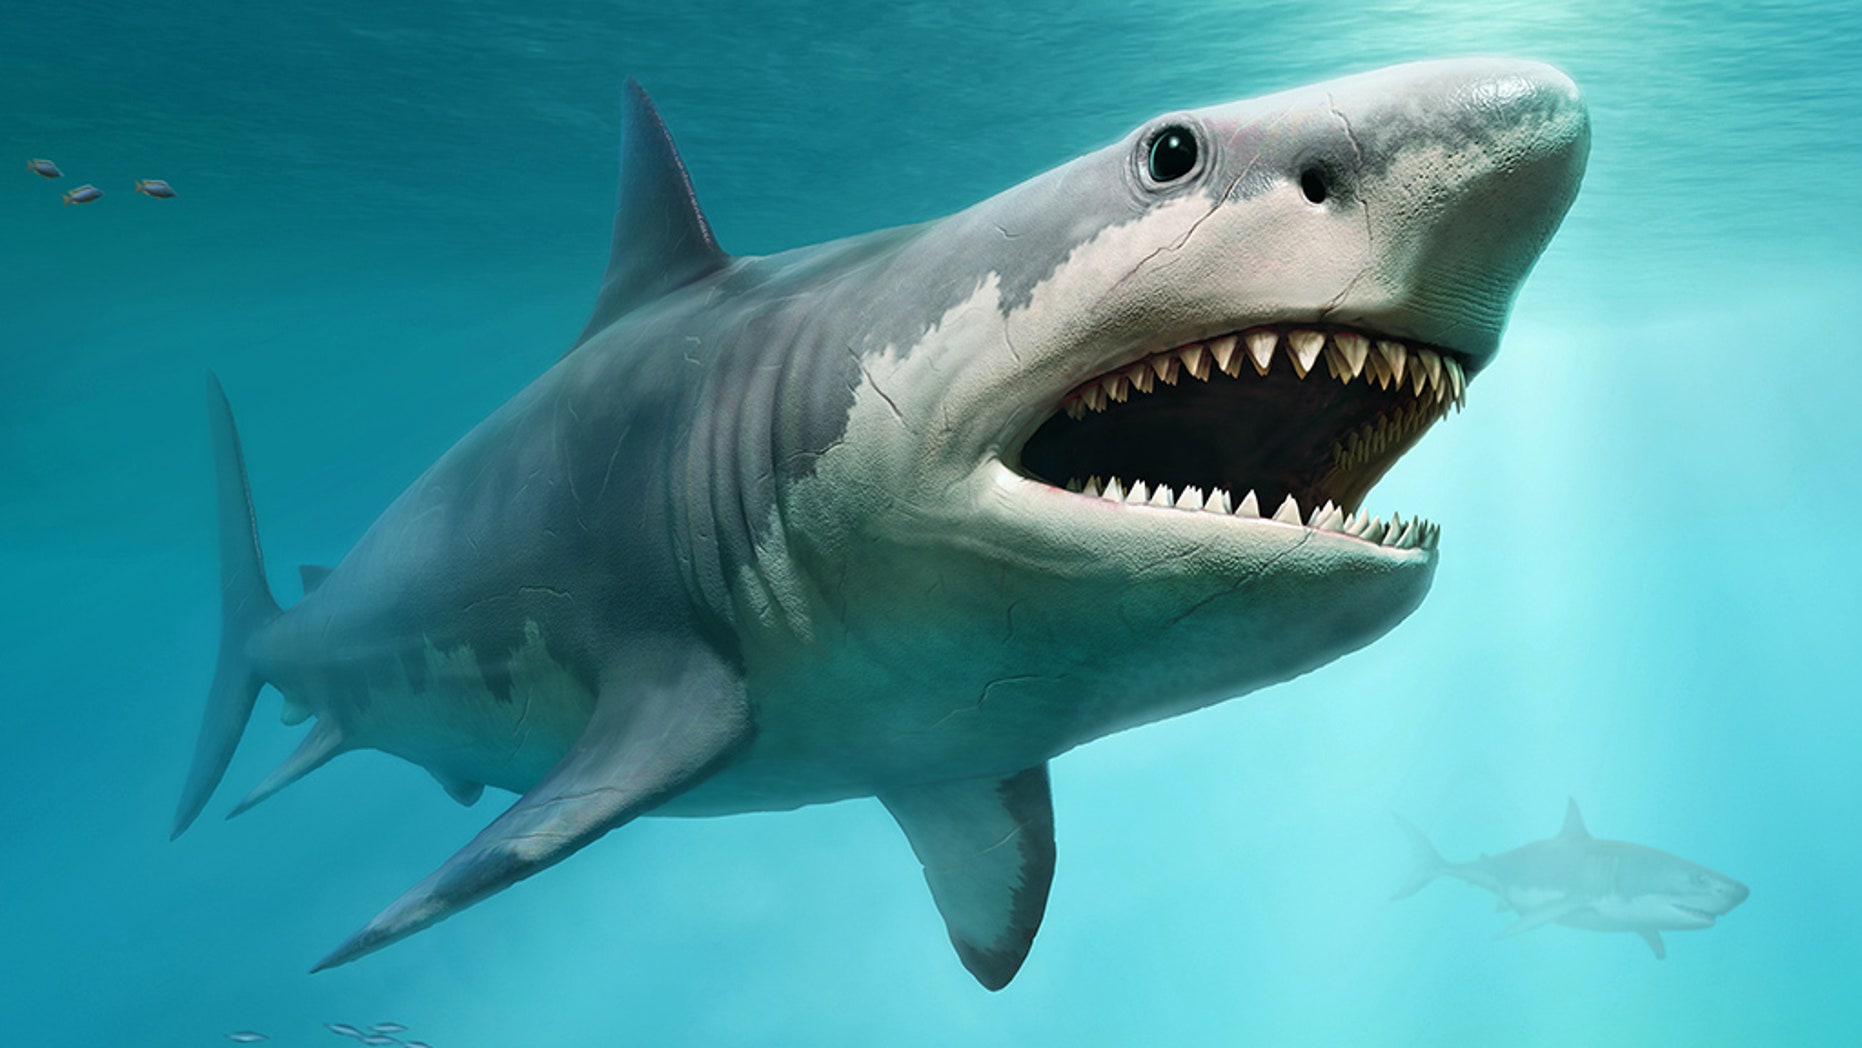 Megalodon may have gone extinct for this shocking reason Fox News